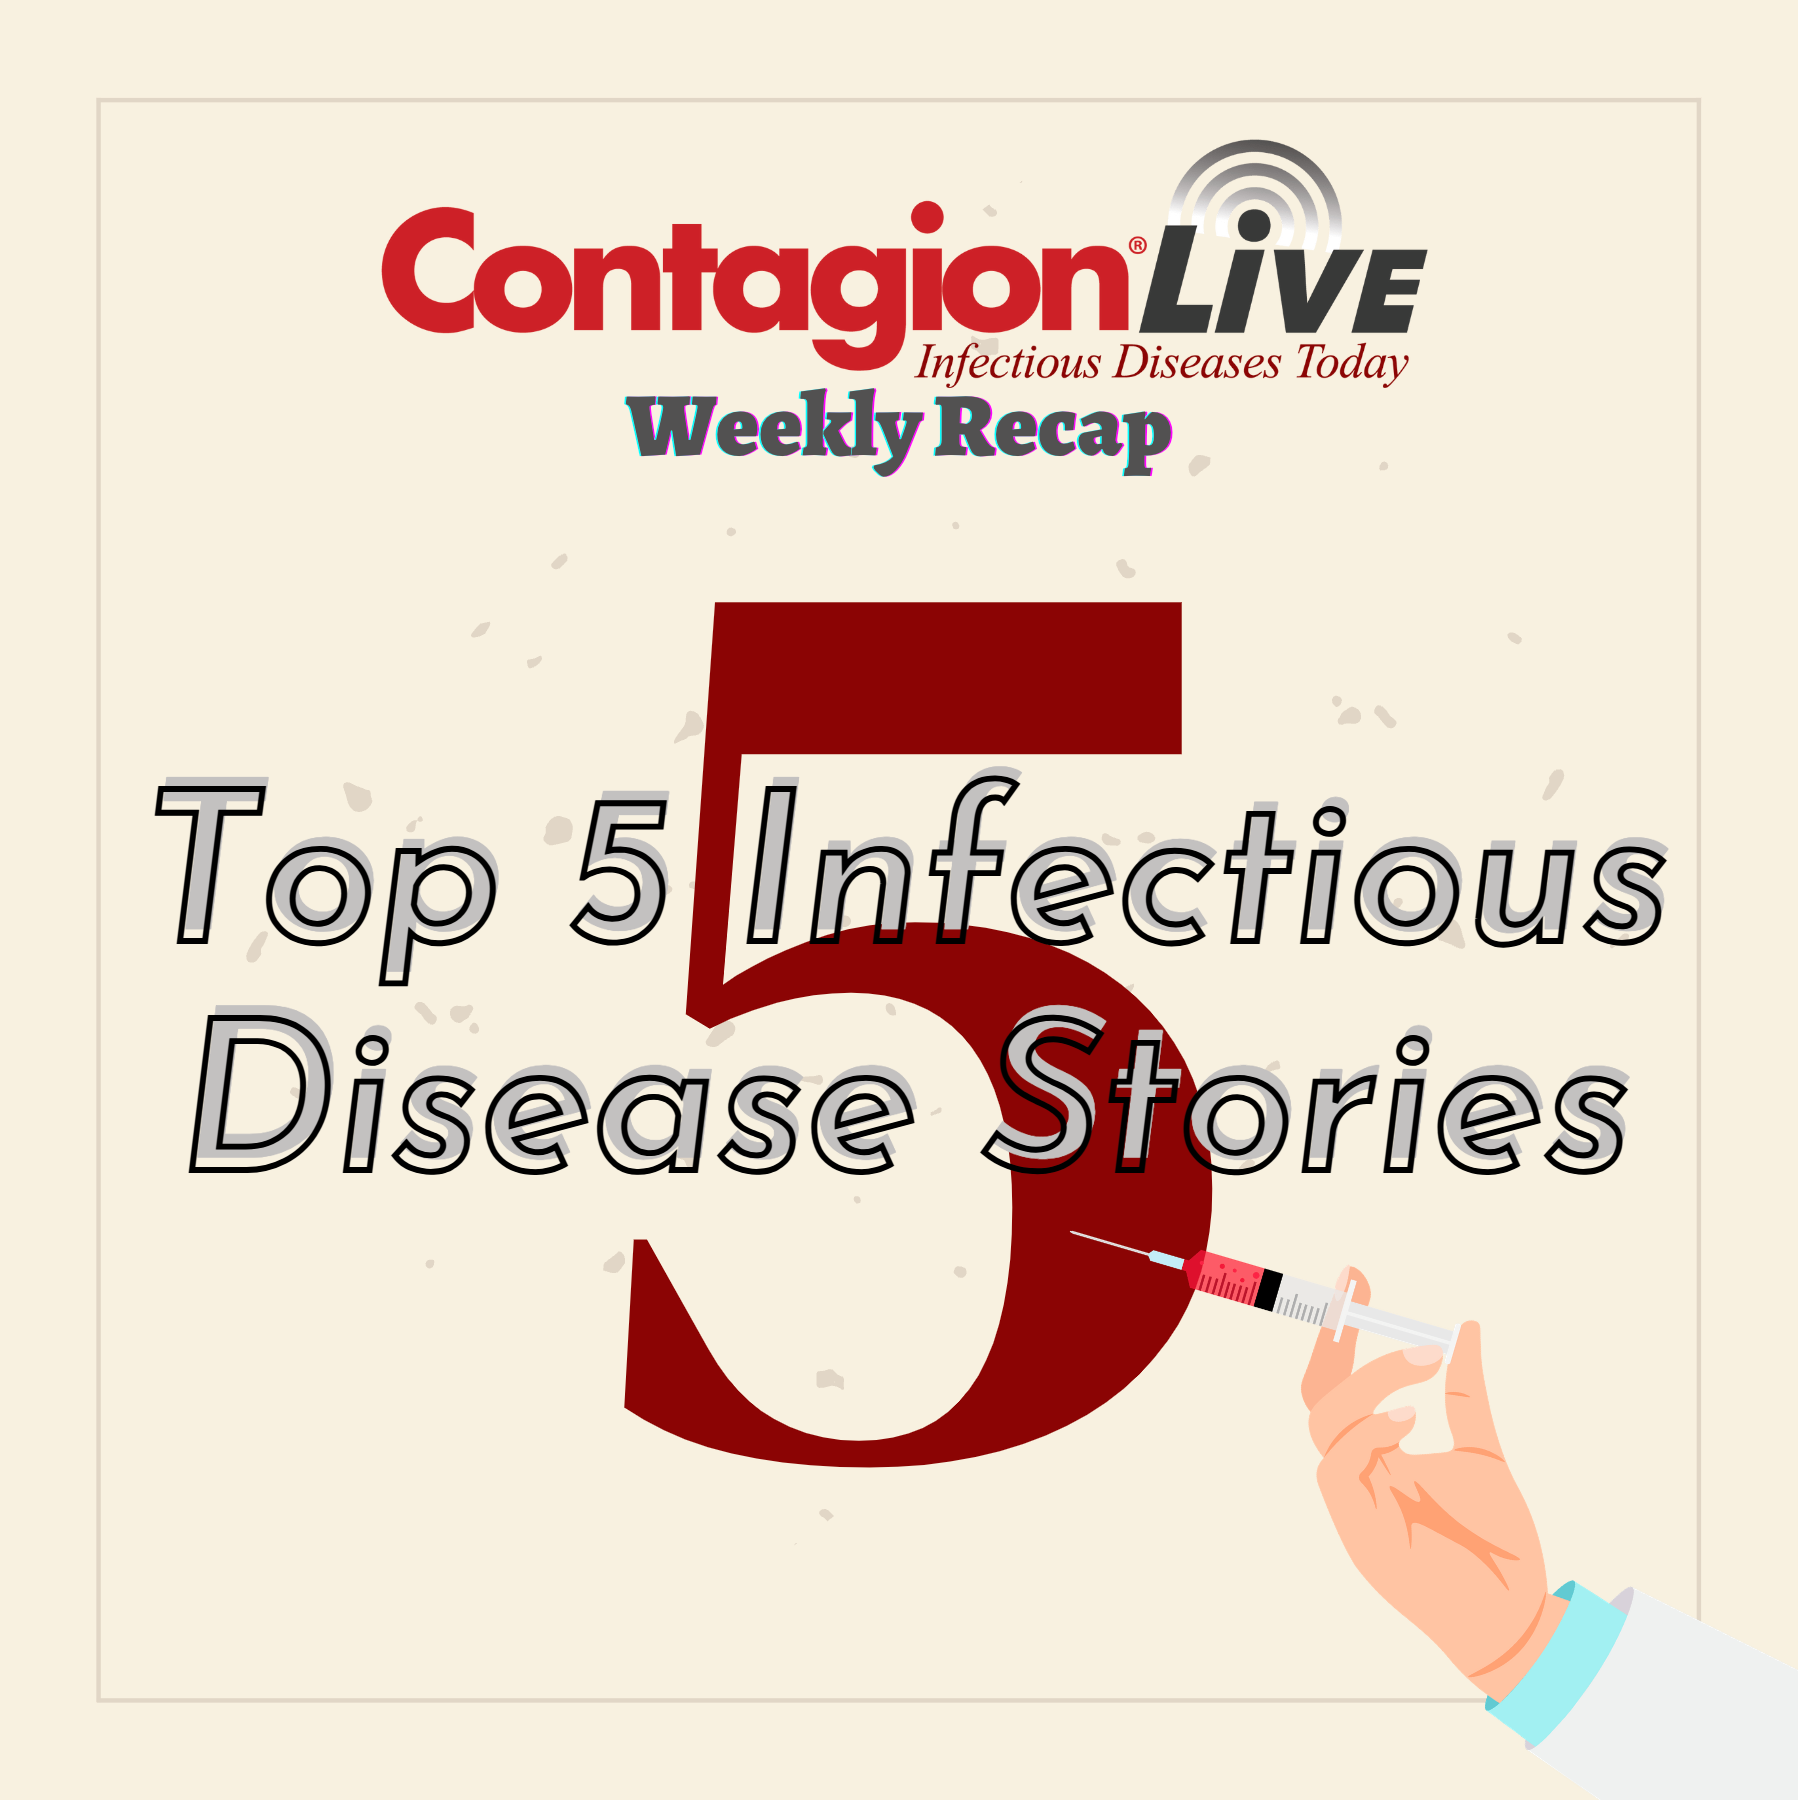 Gut Health Takes Center Stage: The Top 5 Gastrointestinal Stories You Need to Know This Week